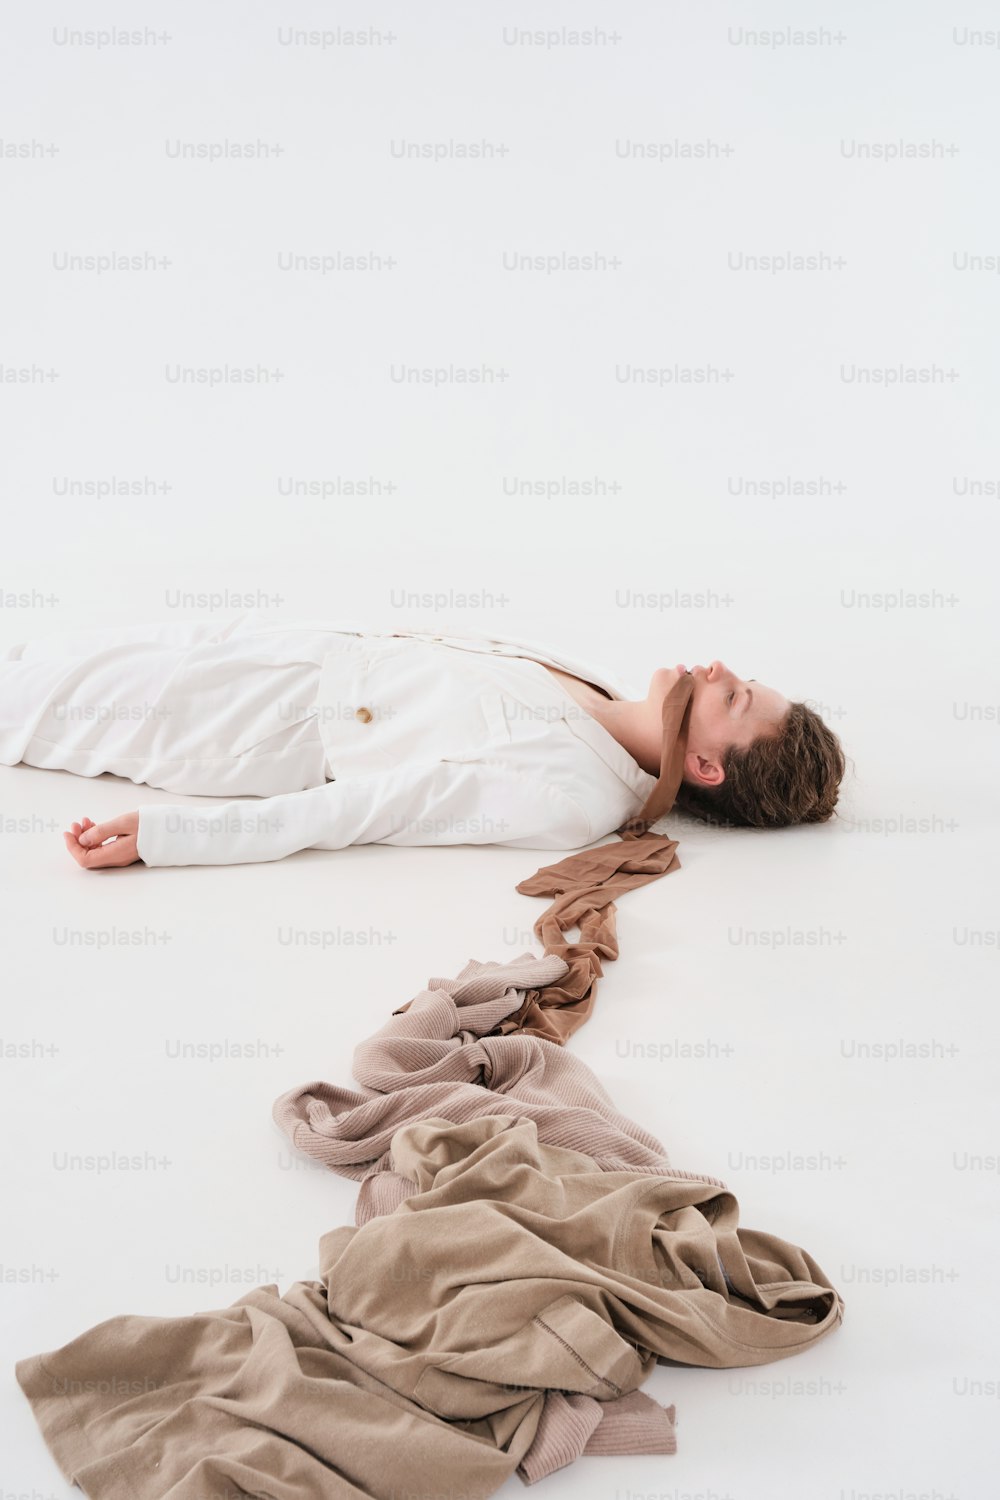 a man laying on the ground next to a pile of clothes